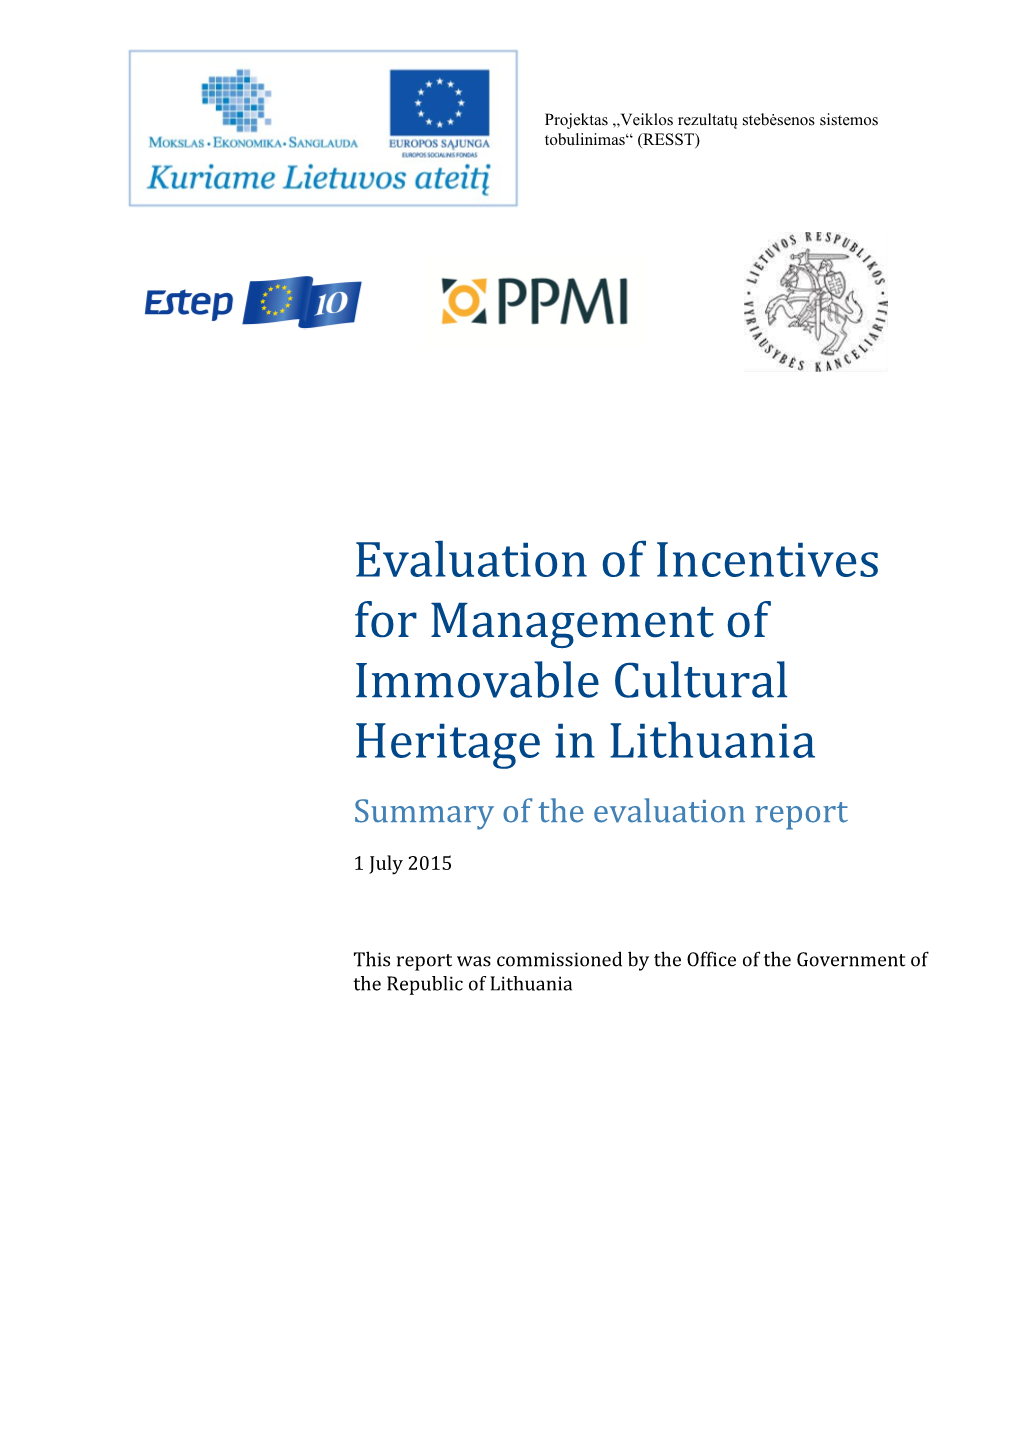 Evaluation of Incentives for Management of Immovable Cultural Heritage in Lithuania